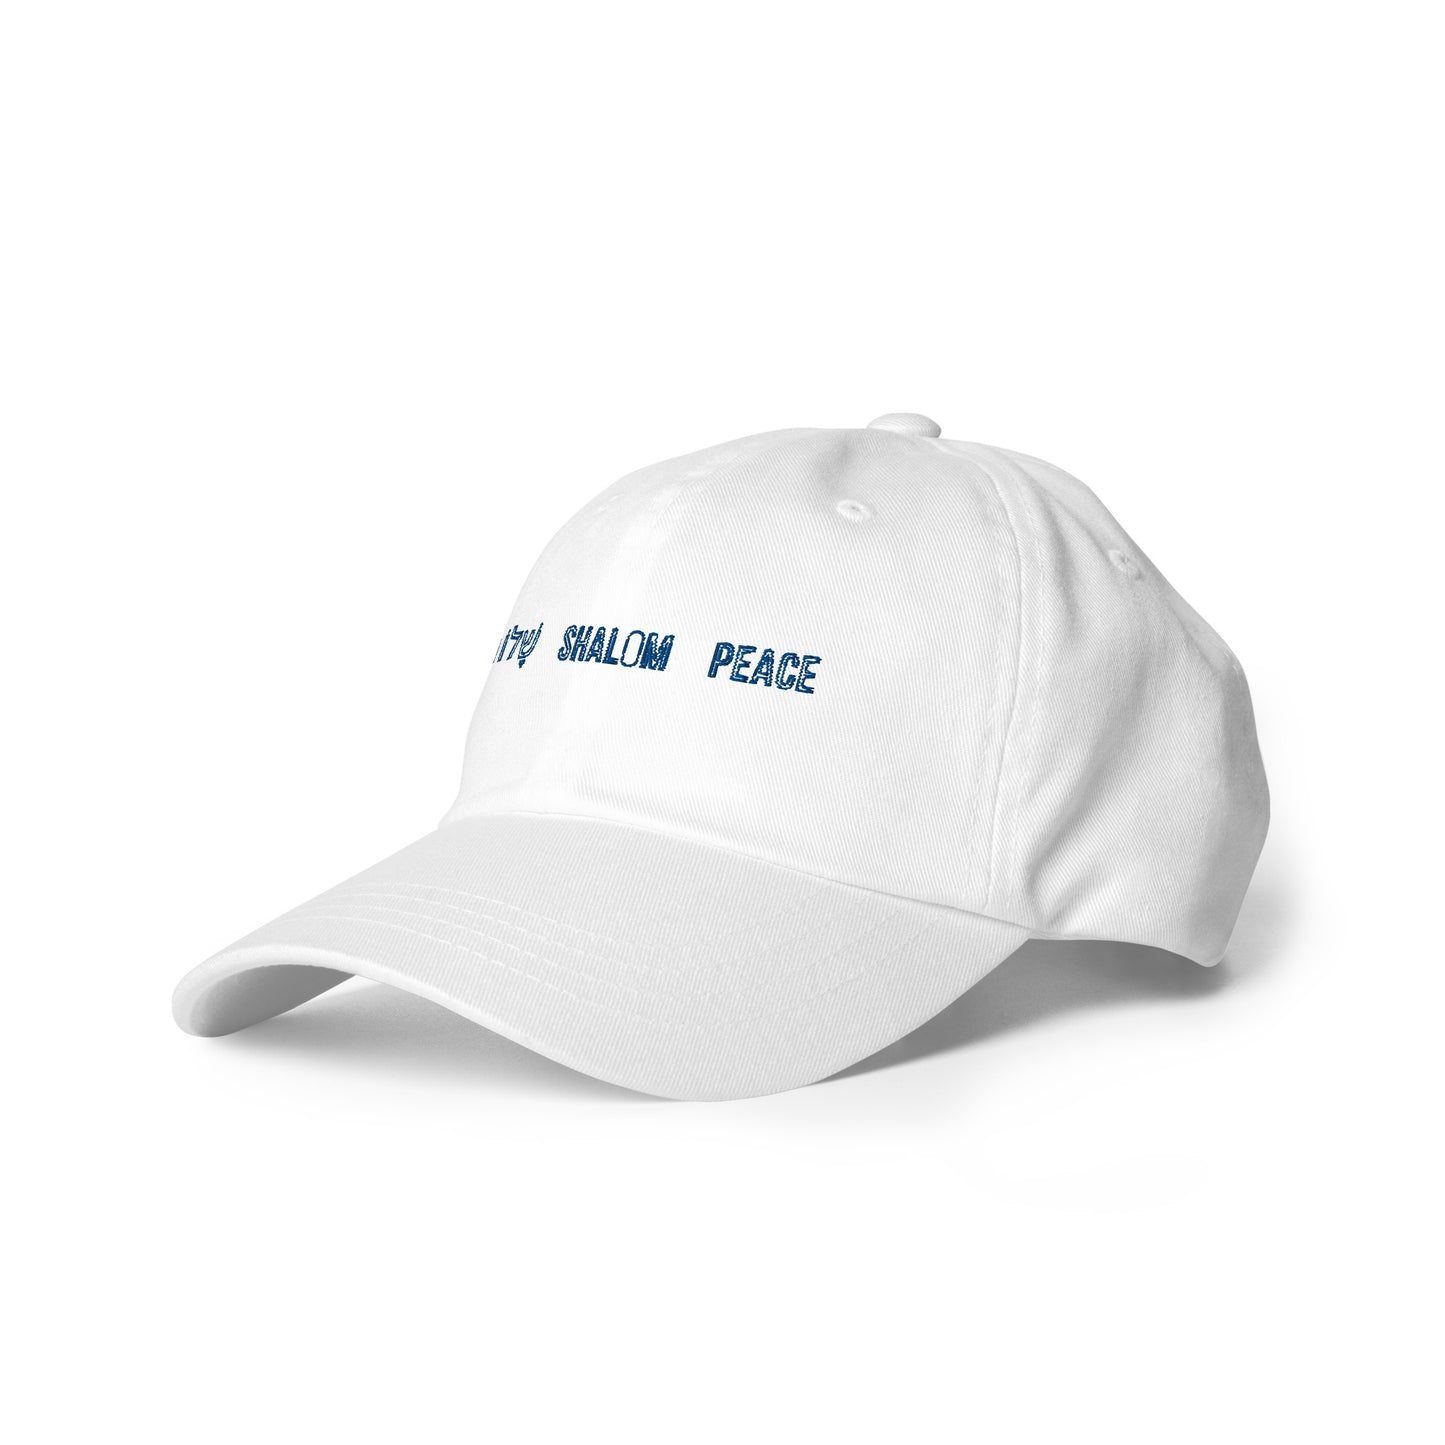 I STAND WITH ISRAEL 🇮🇱 Dad hat